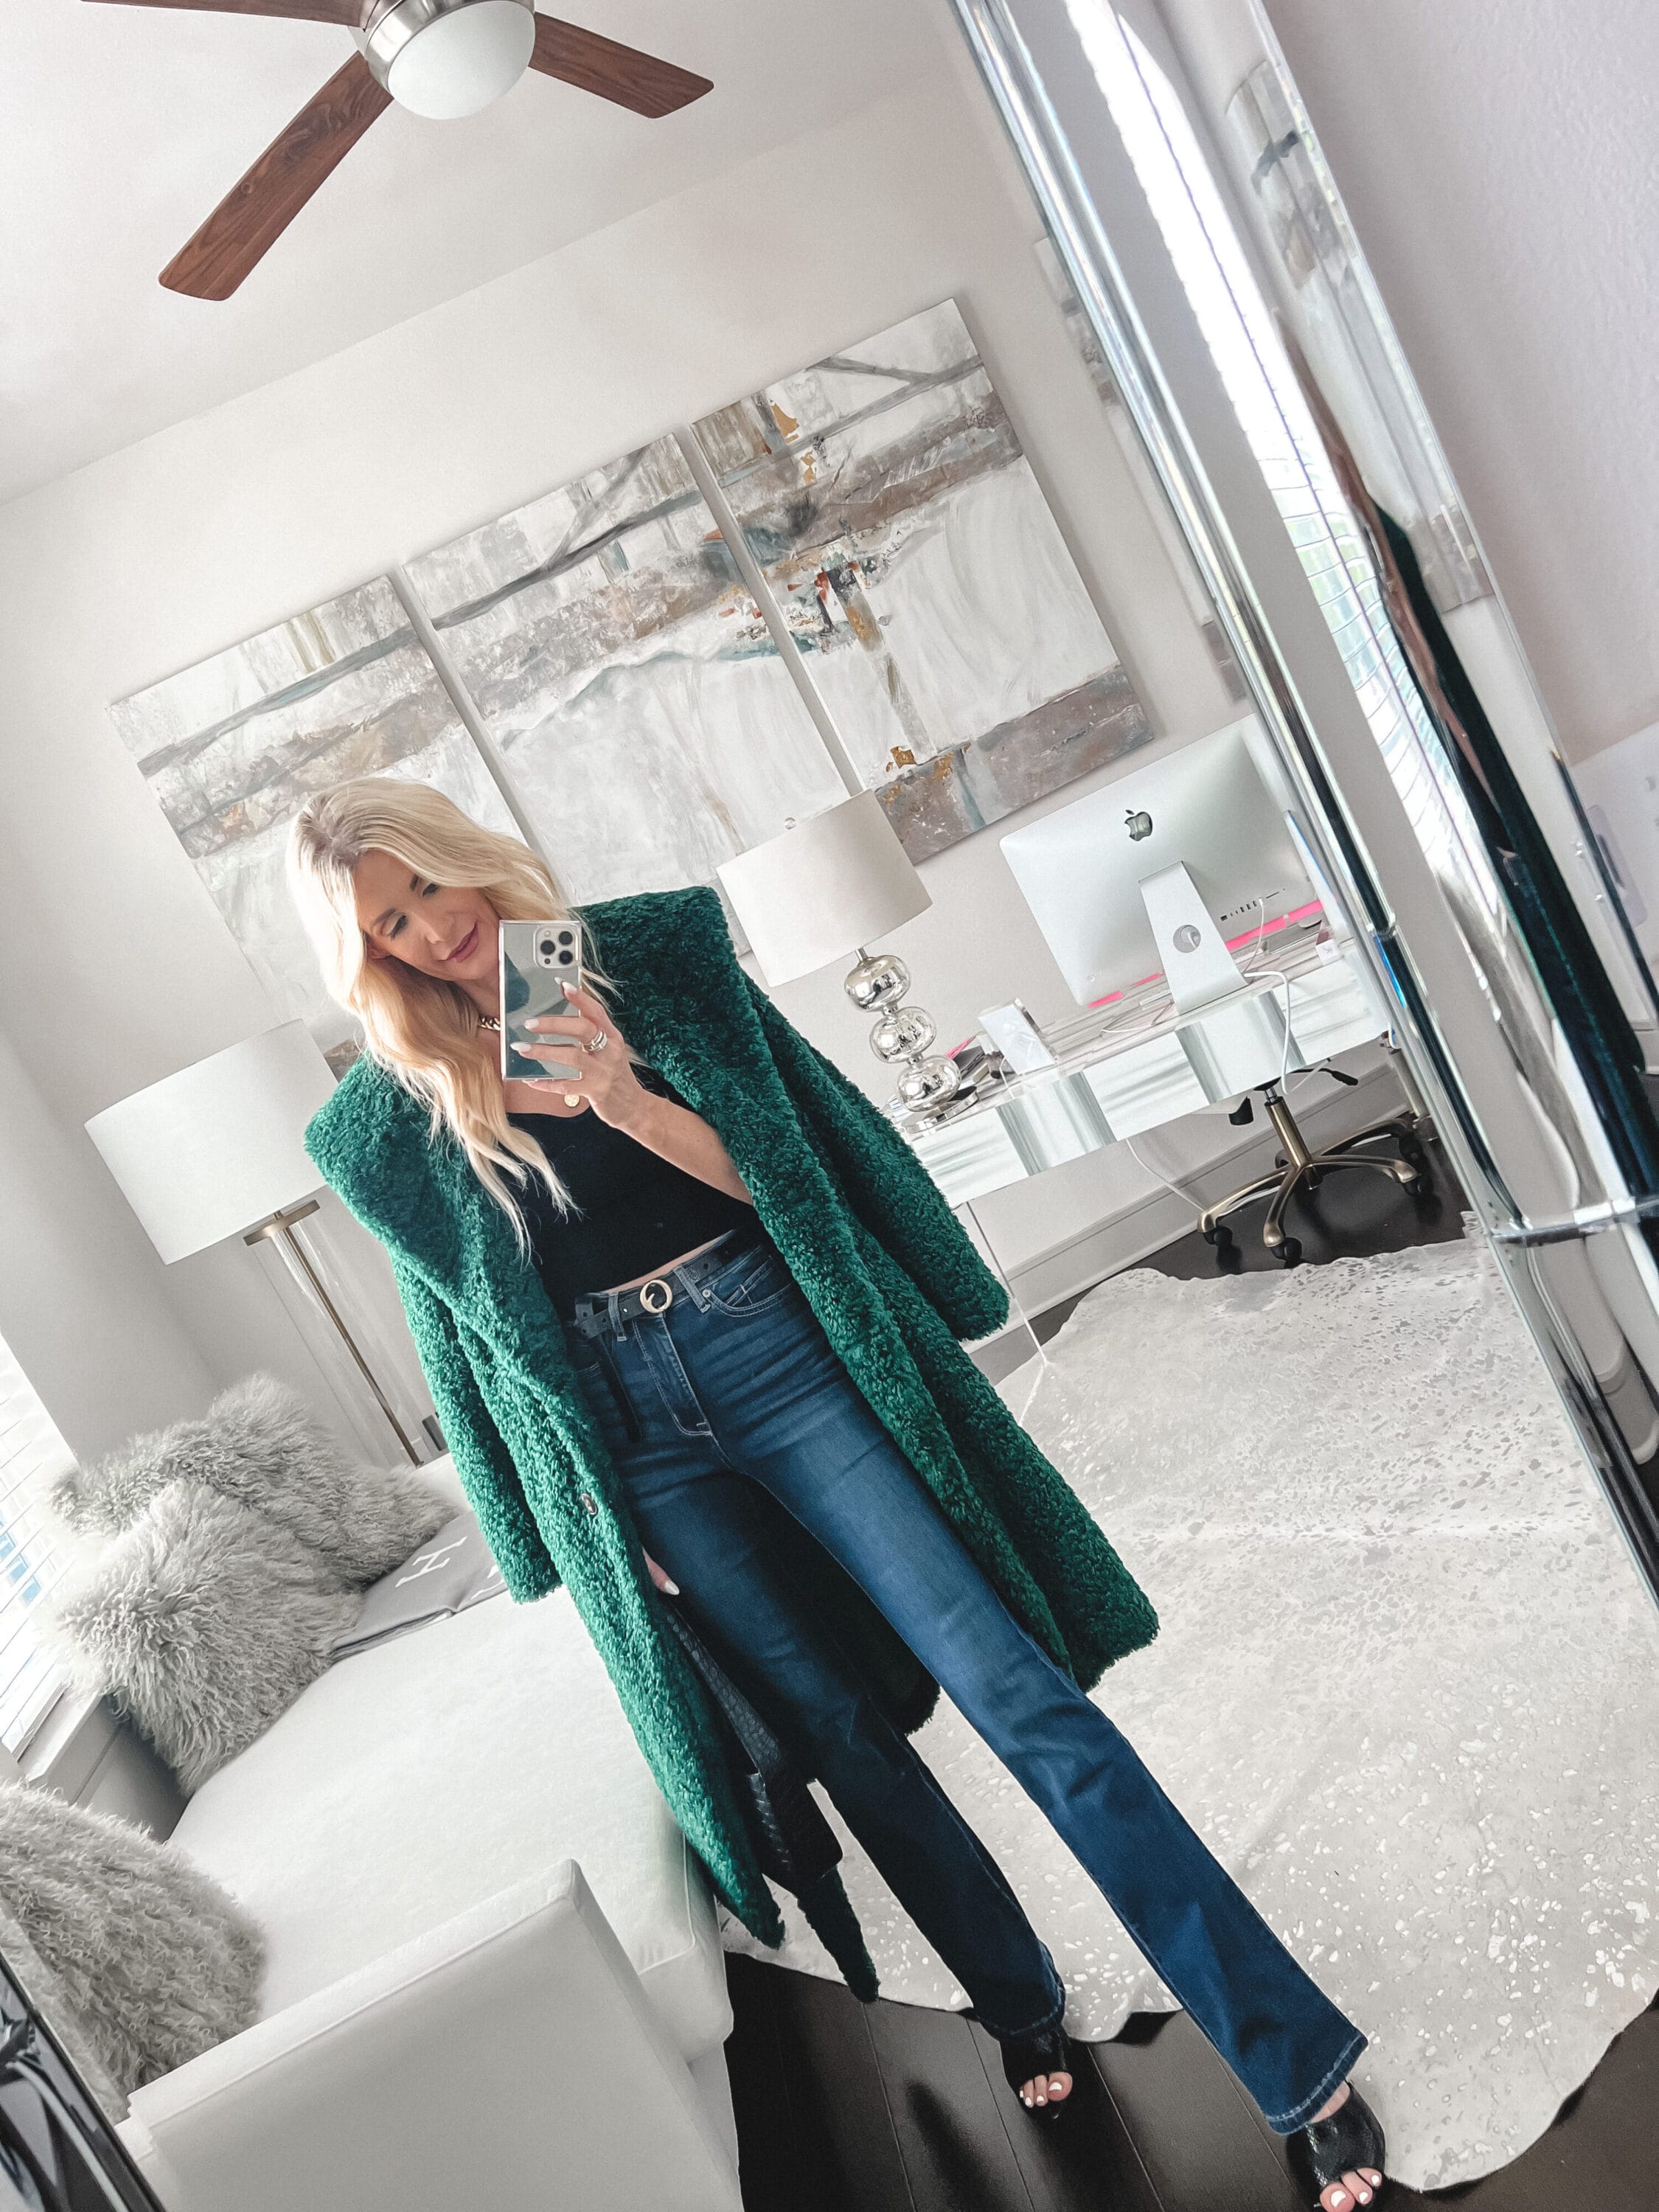 Over 40 fashion stylist wearing green teddy coat over black tank and straight leg jeans as one of the best under $50 pieces your fall wardrobe will love.